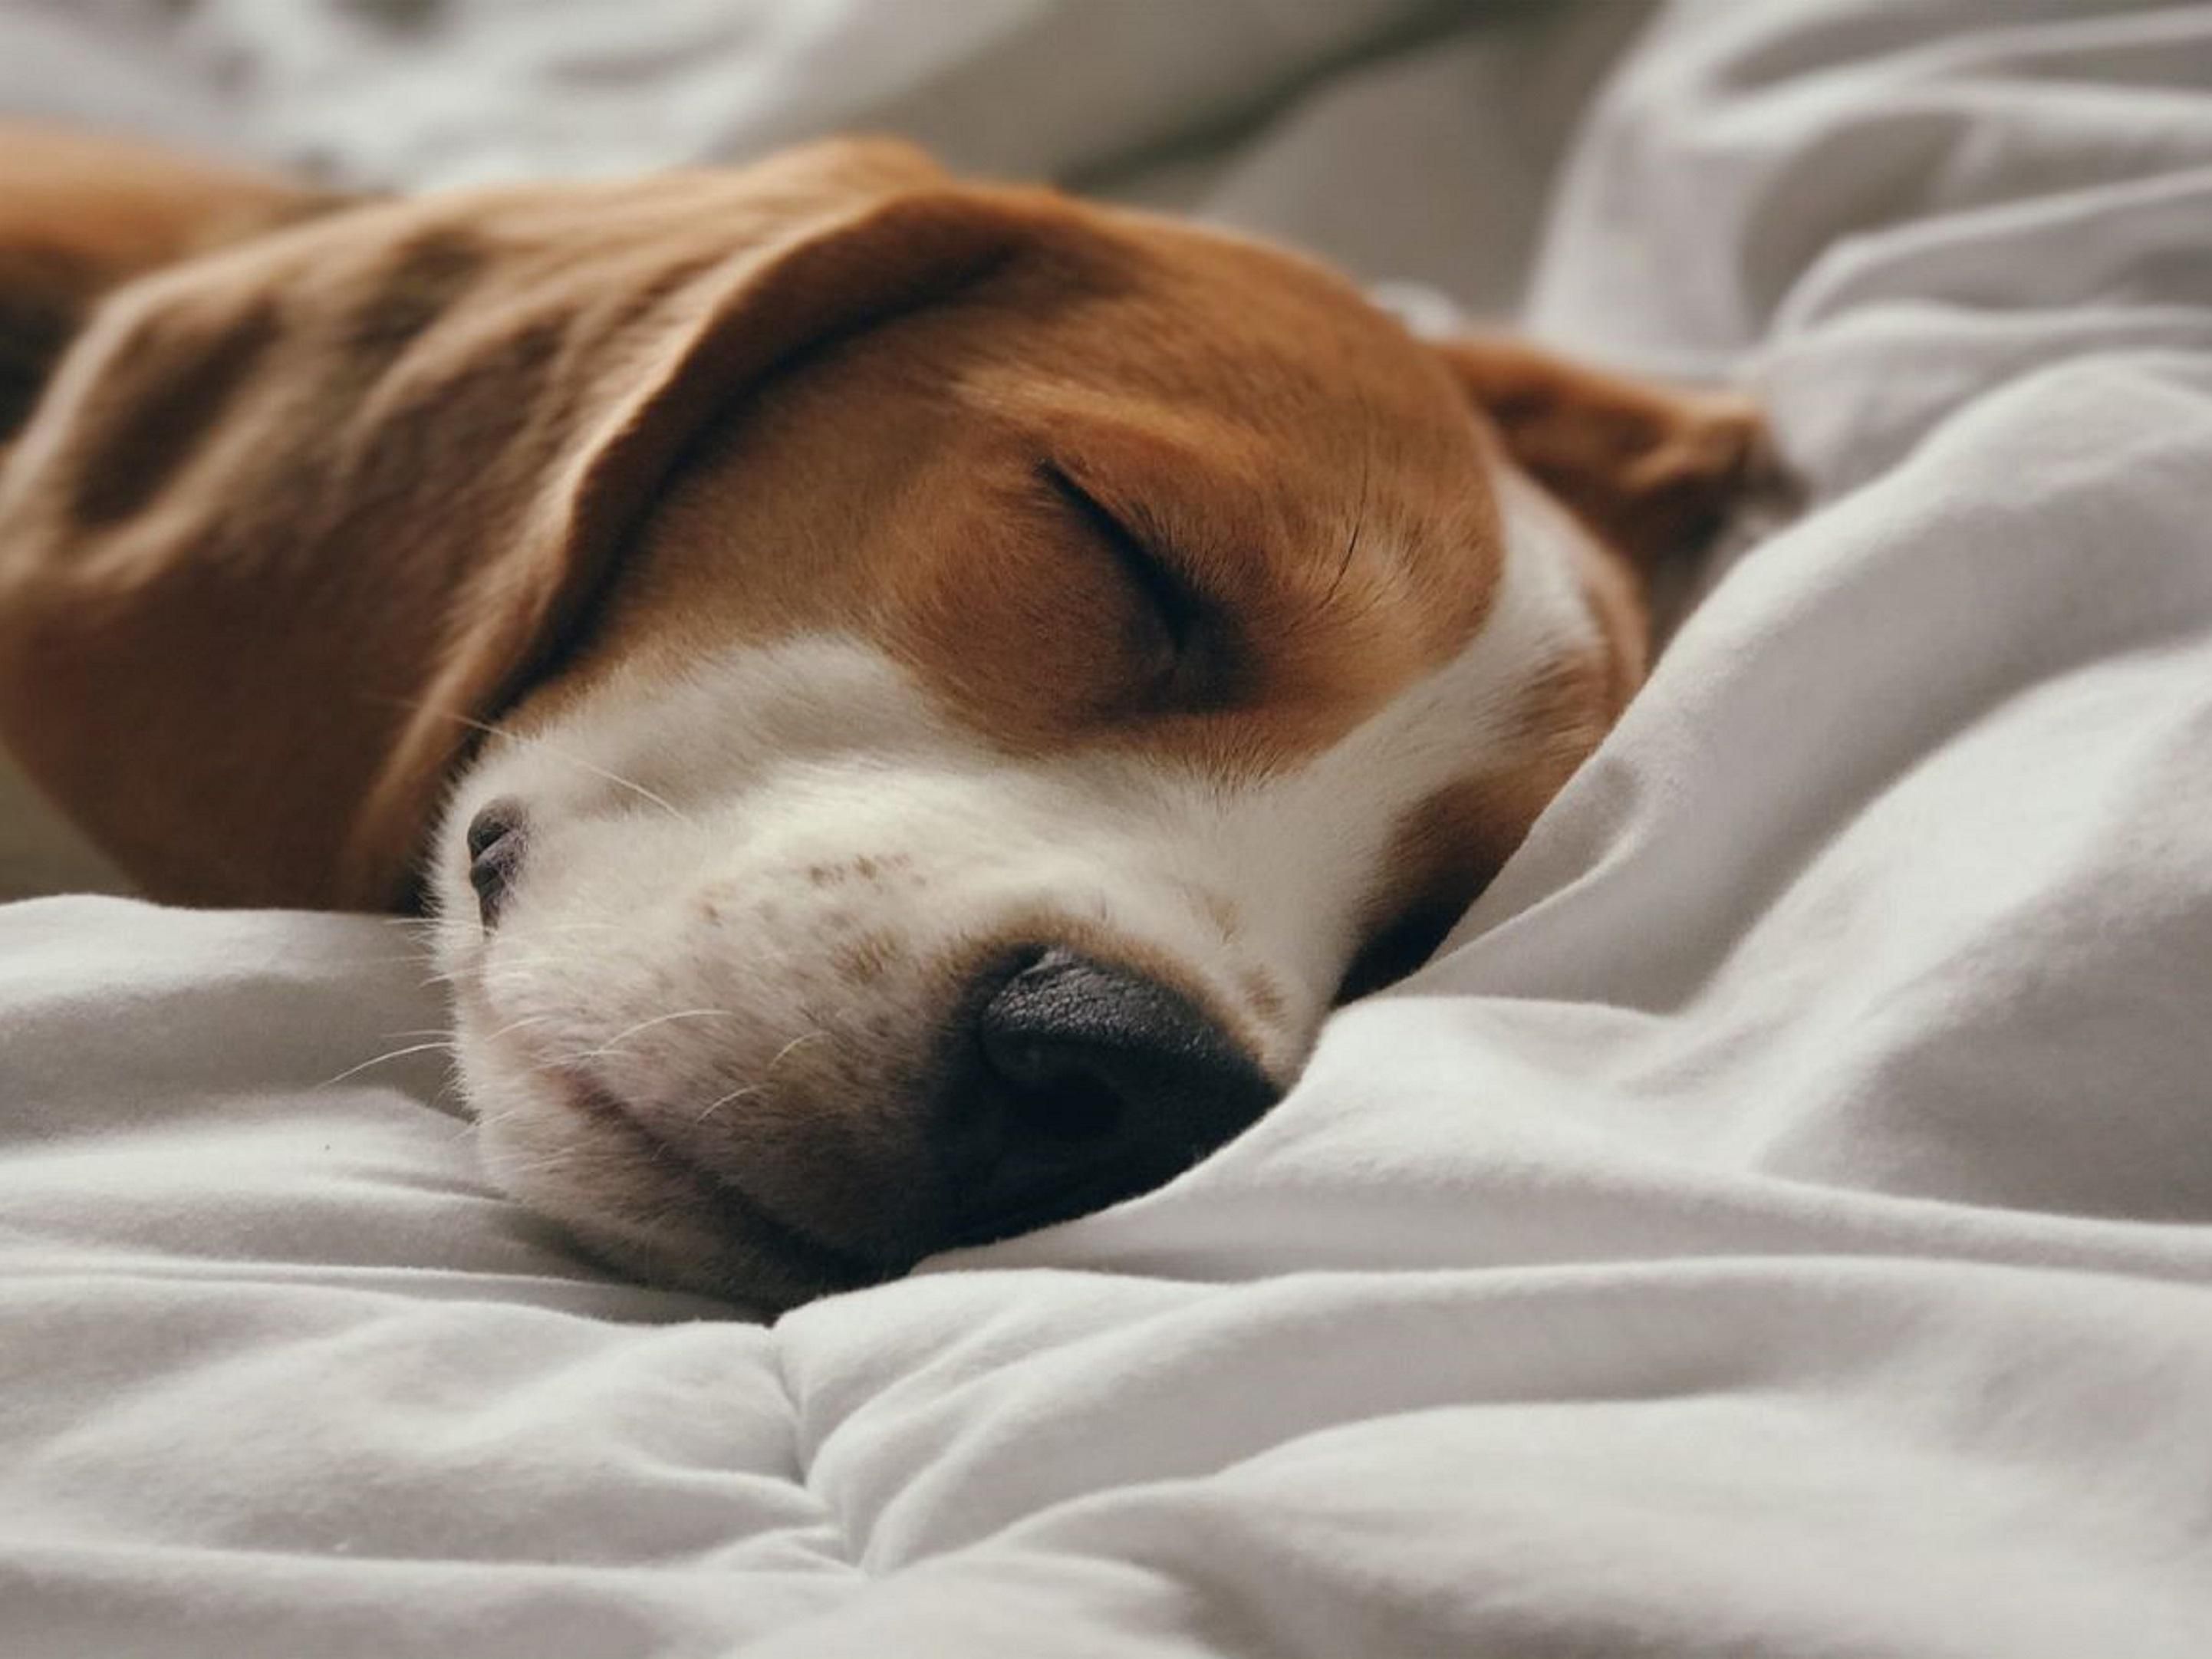 We welcome up to 2 dogs under 40 lbs. per room with a $50 per night pet cleaning fee. We request that your pet not be left unattended in the guest room. 
For more information please call.